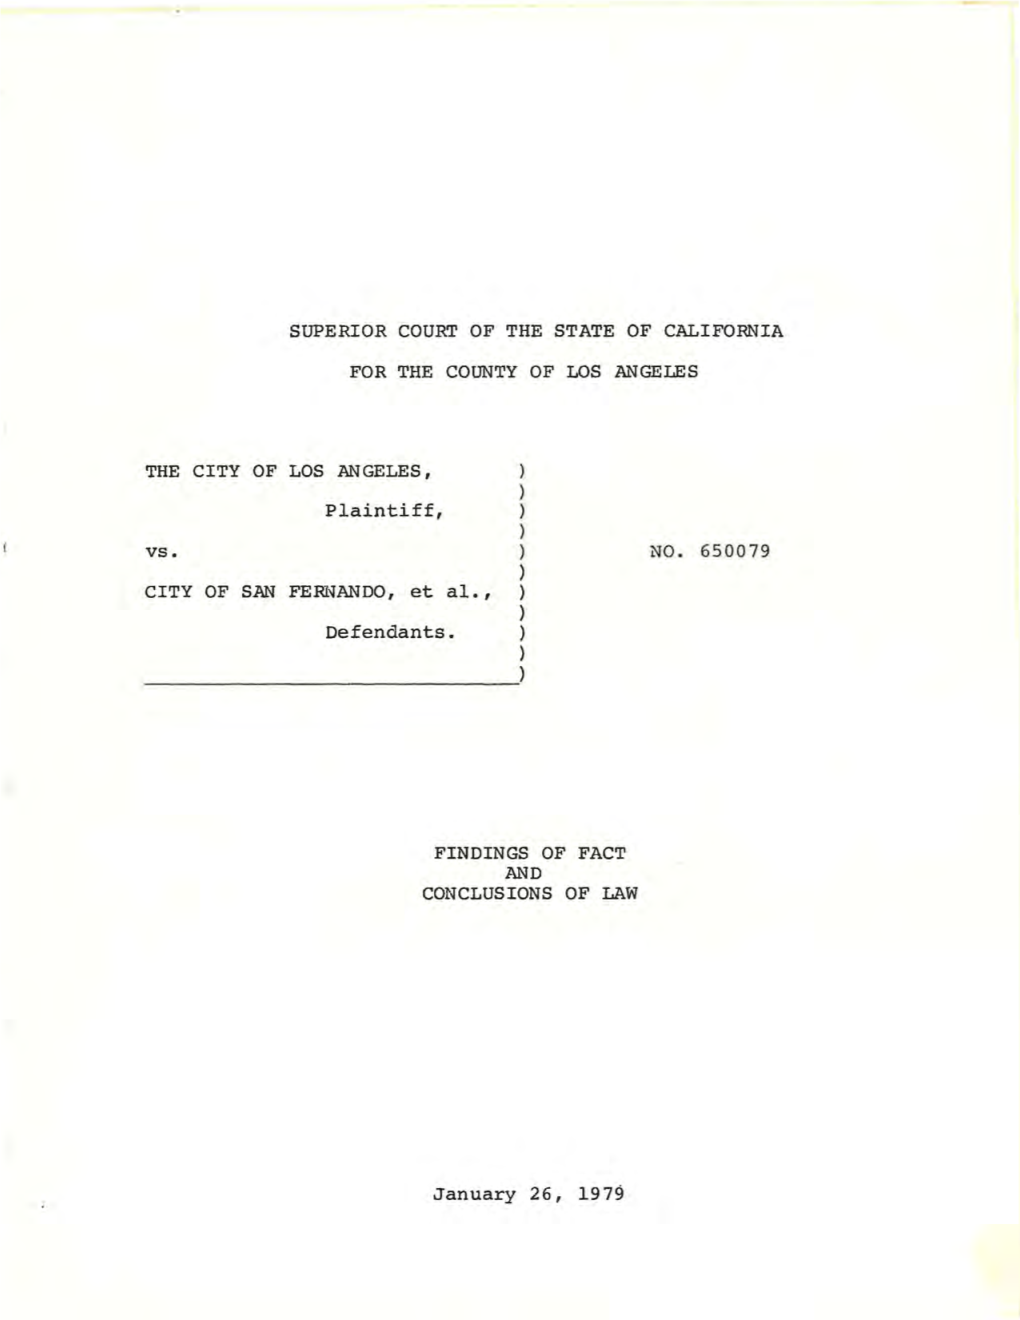 Findings of Fact and Conclusions of Law January 26, 1979